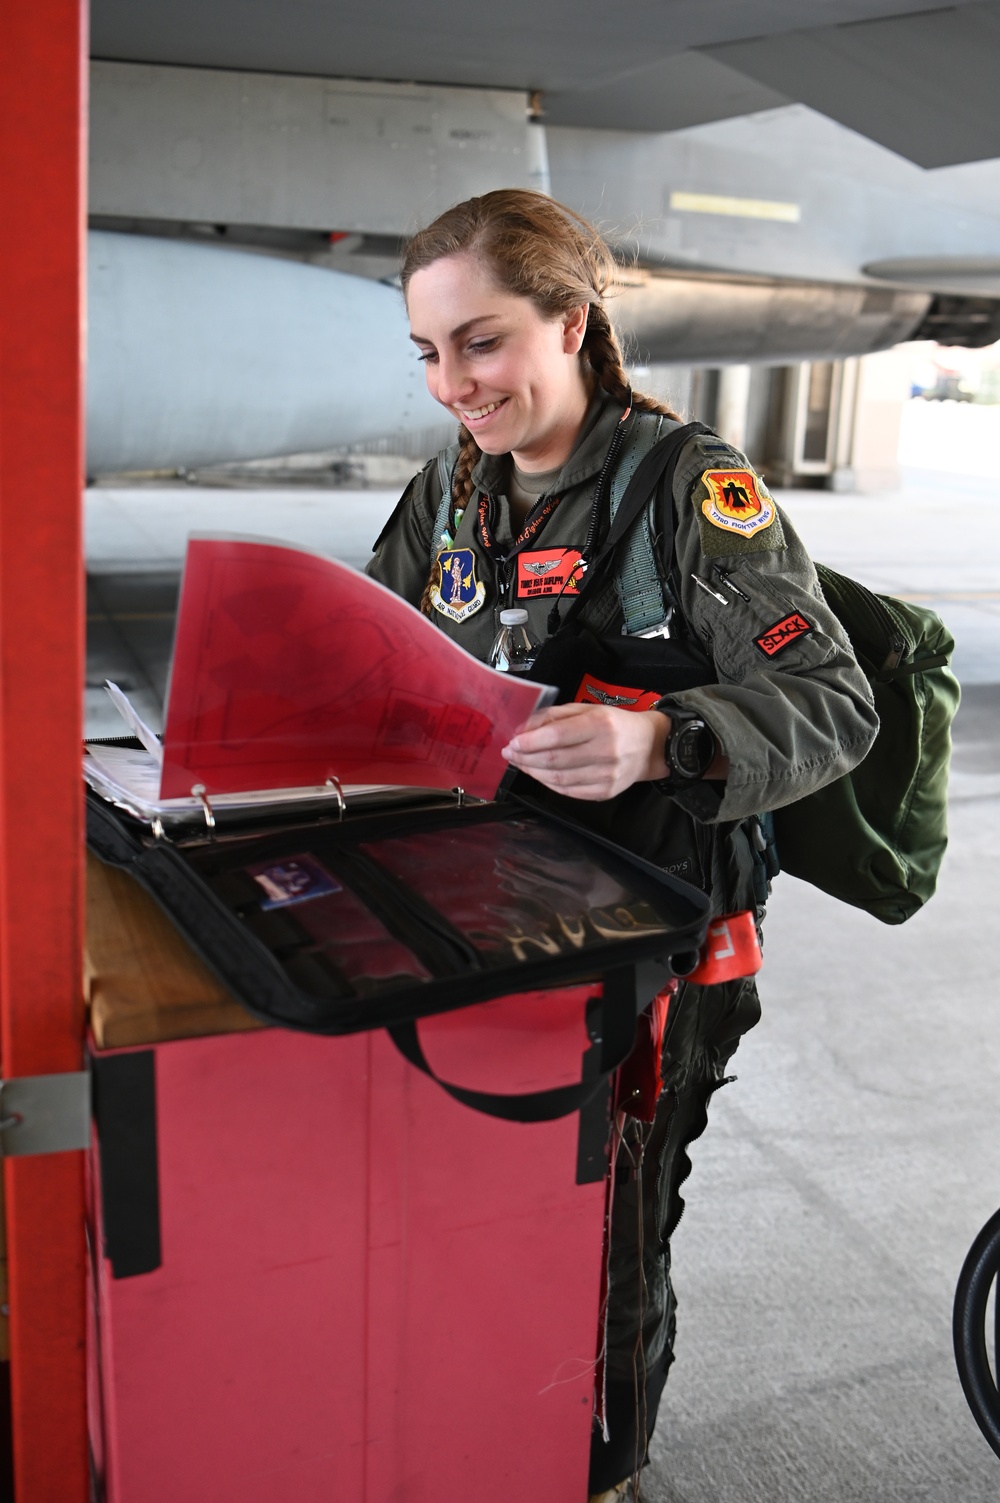 Shattering the Glass Ceiling at Mach 2.5